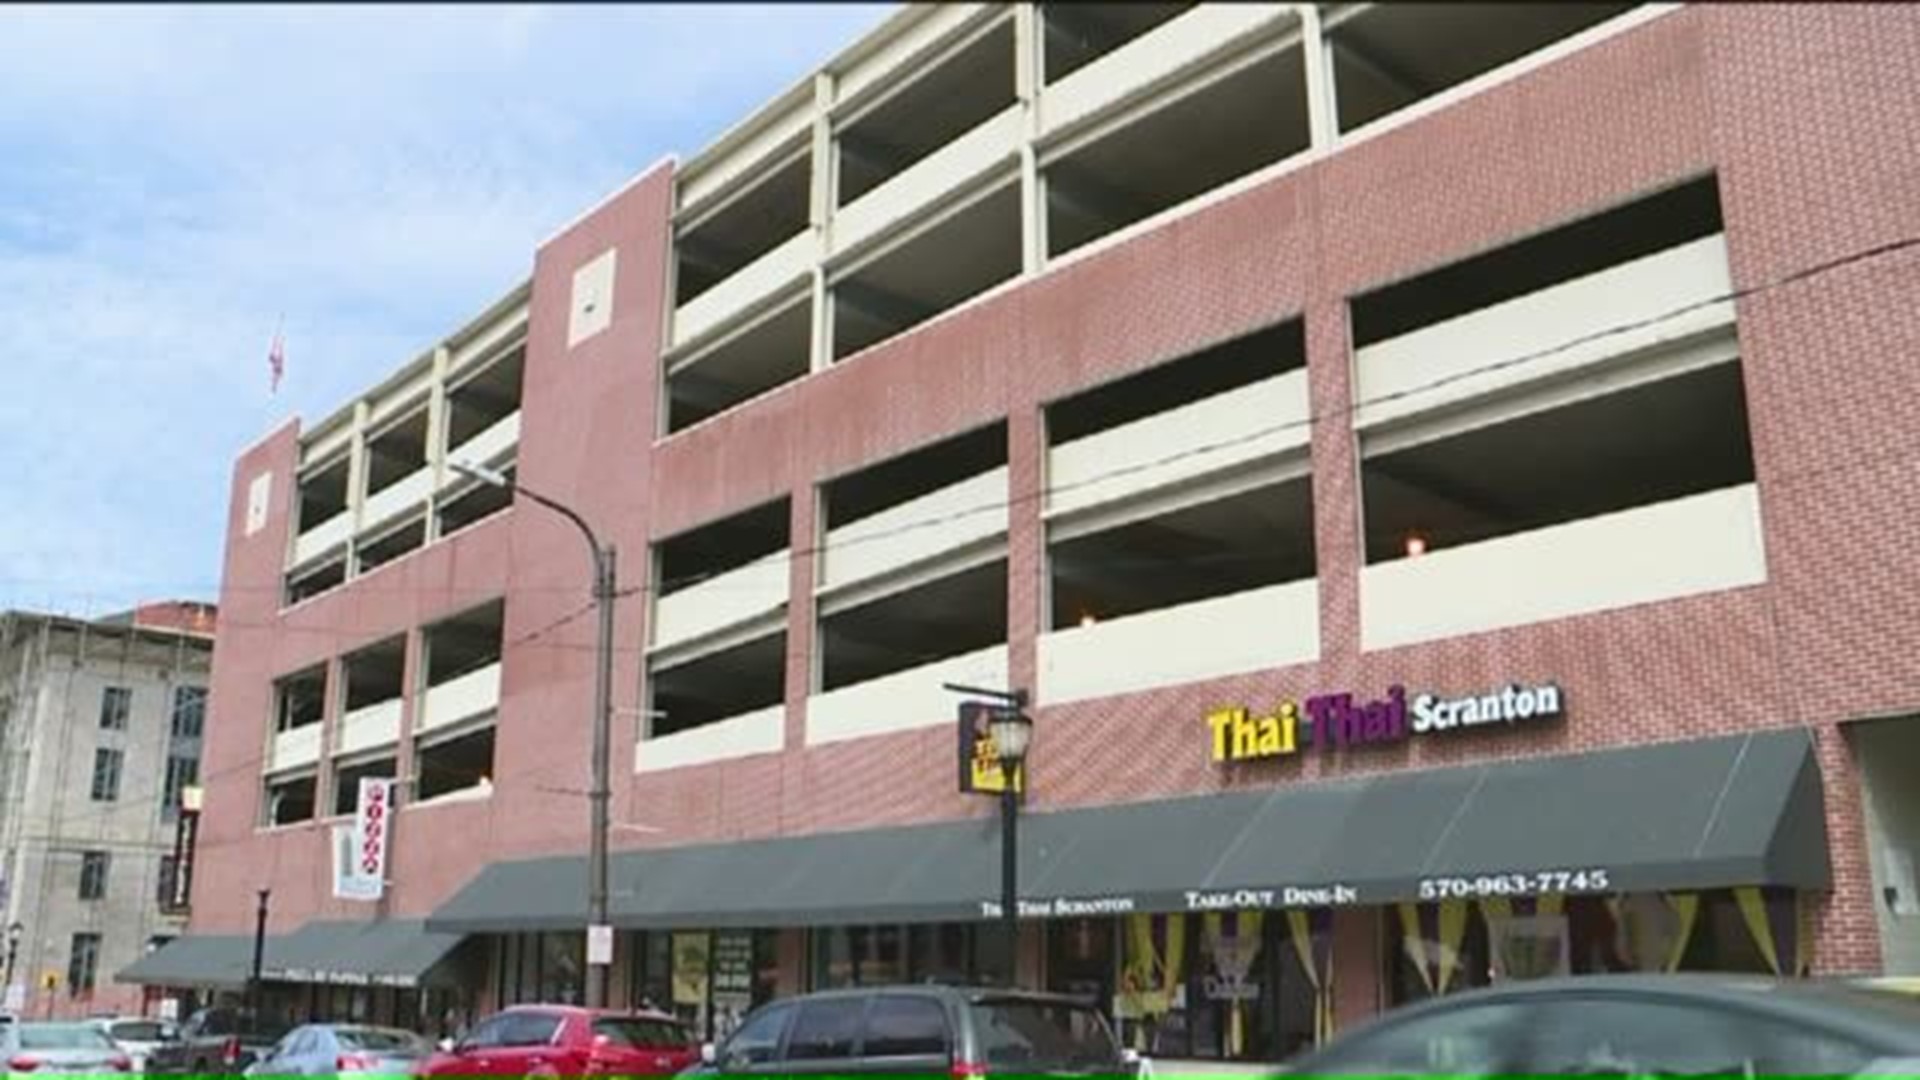 Painful Parking: Elevator Repairs to Begin Next Month